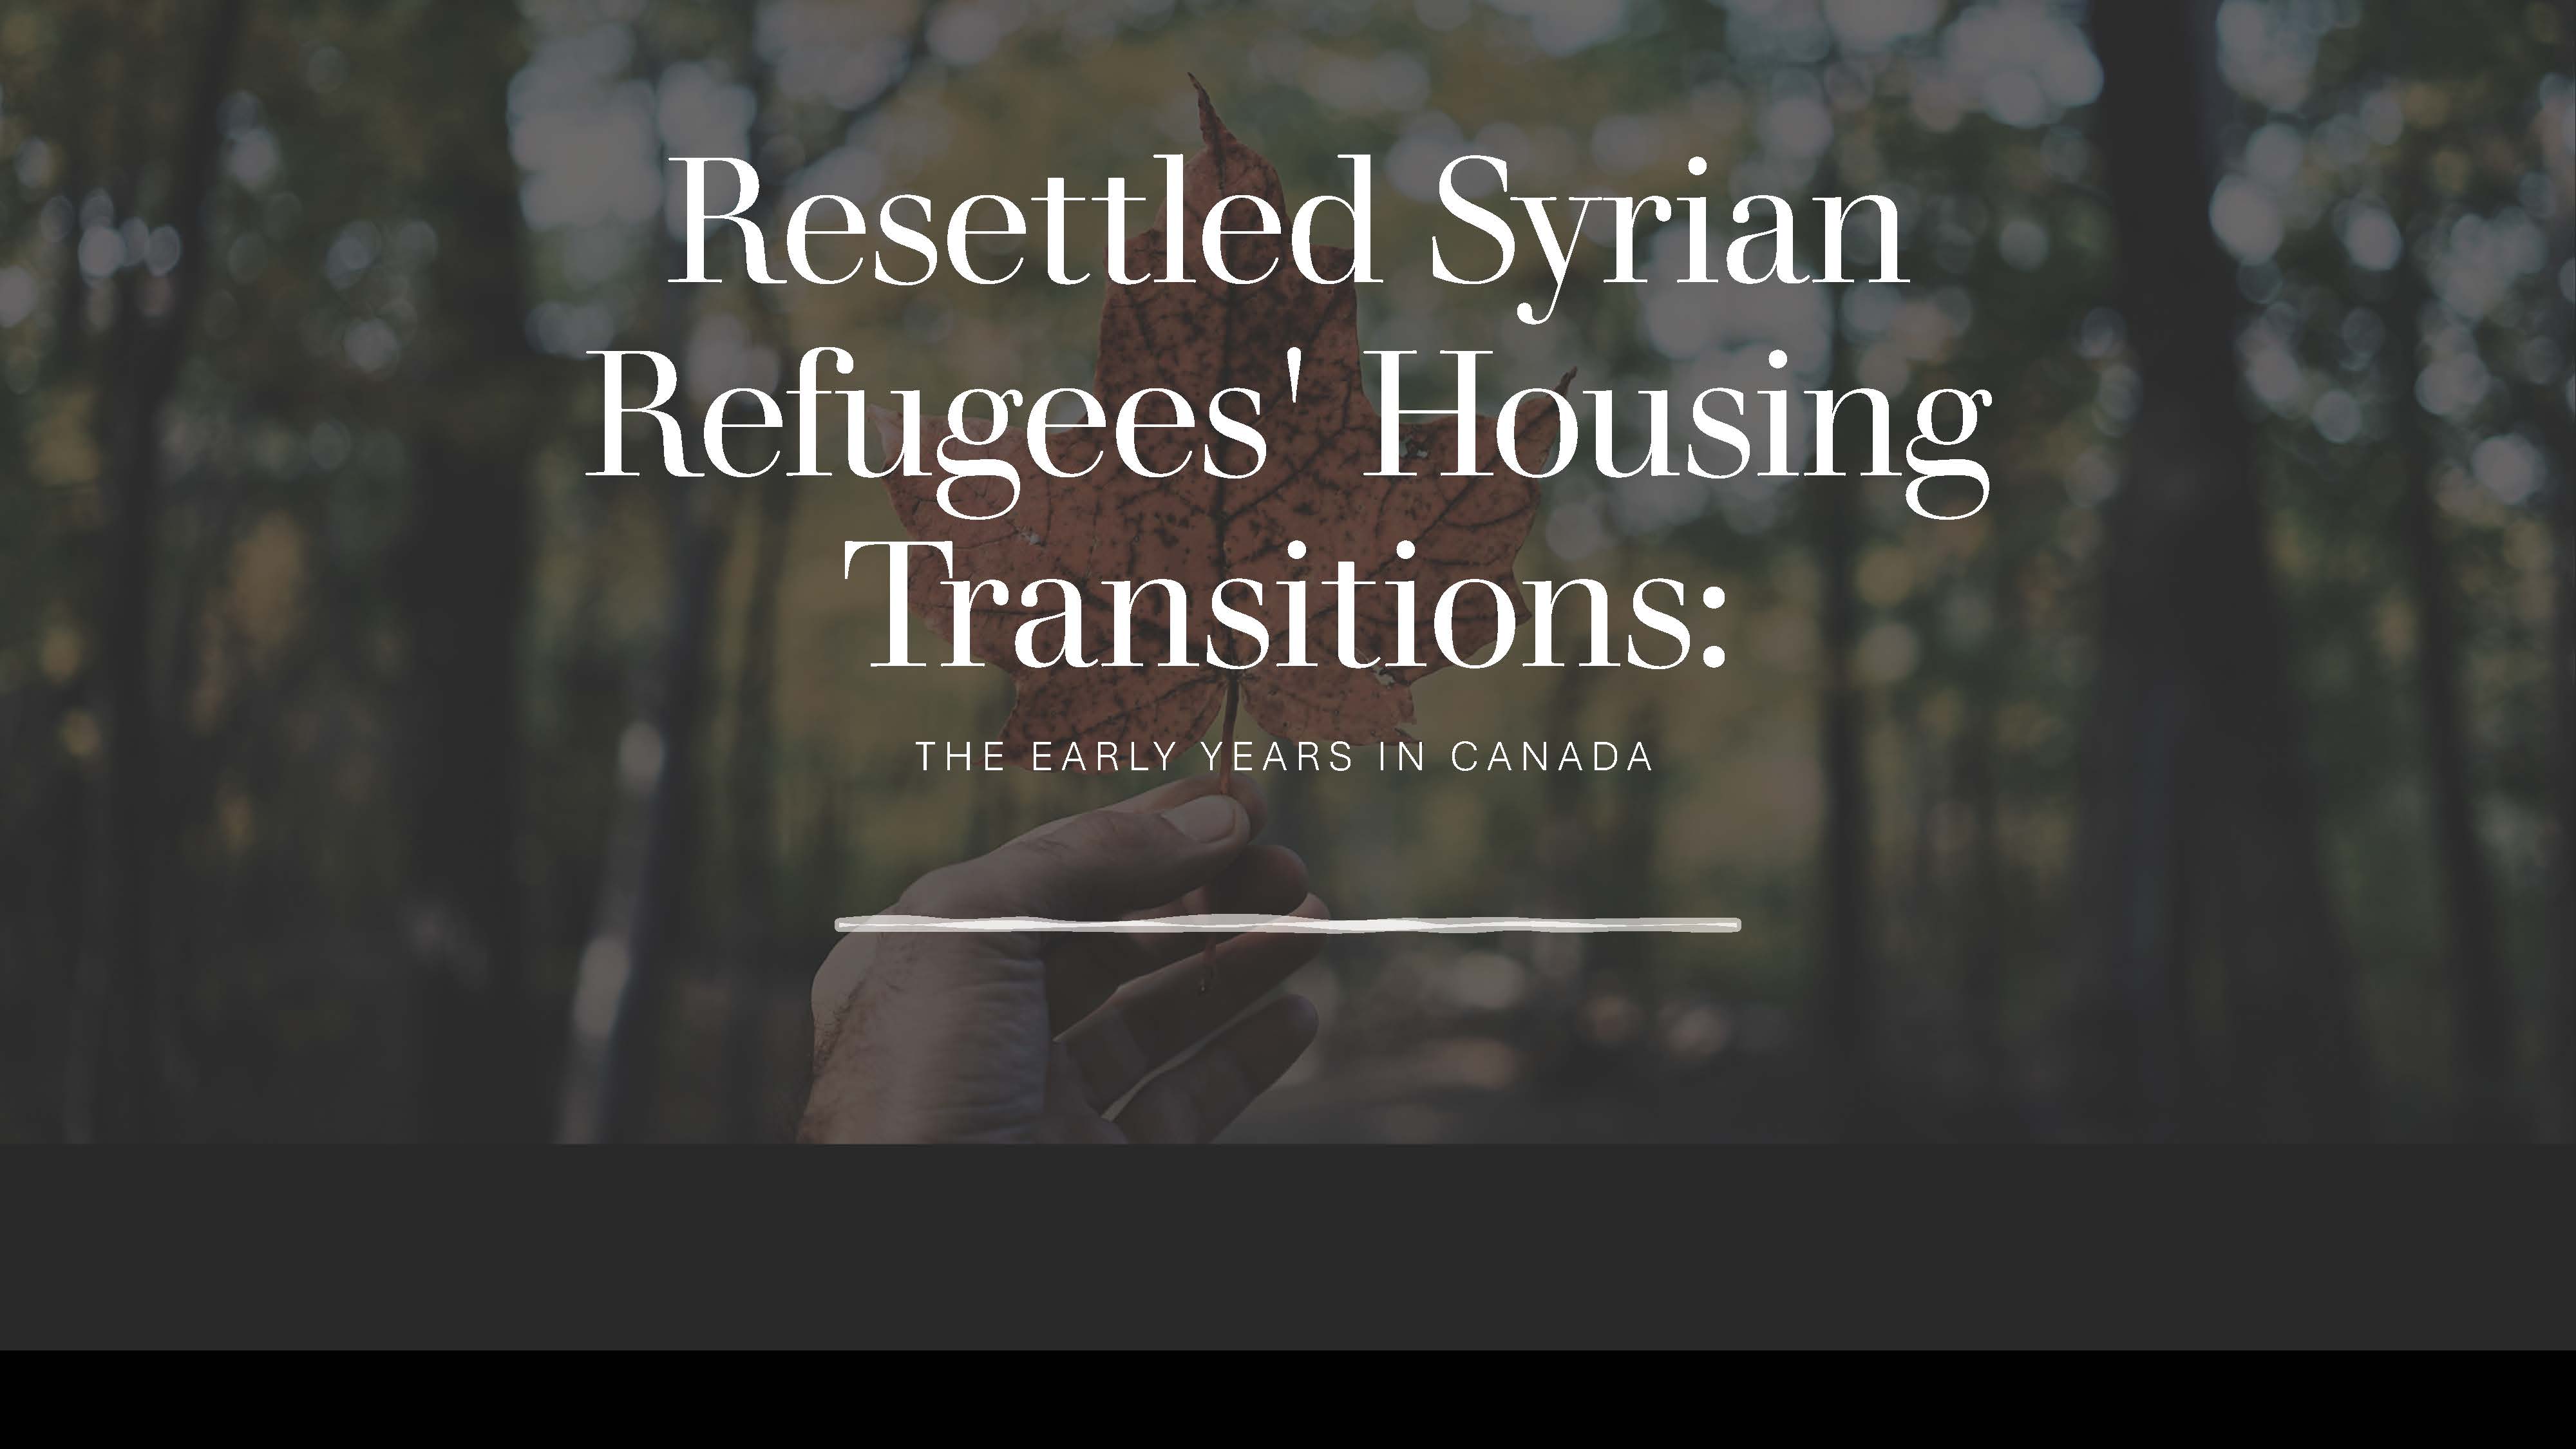 Resettled Syrian Refugees' Housing Transitions